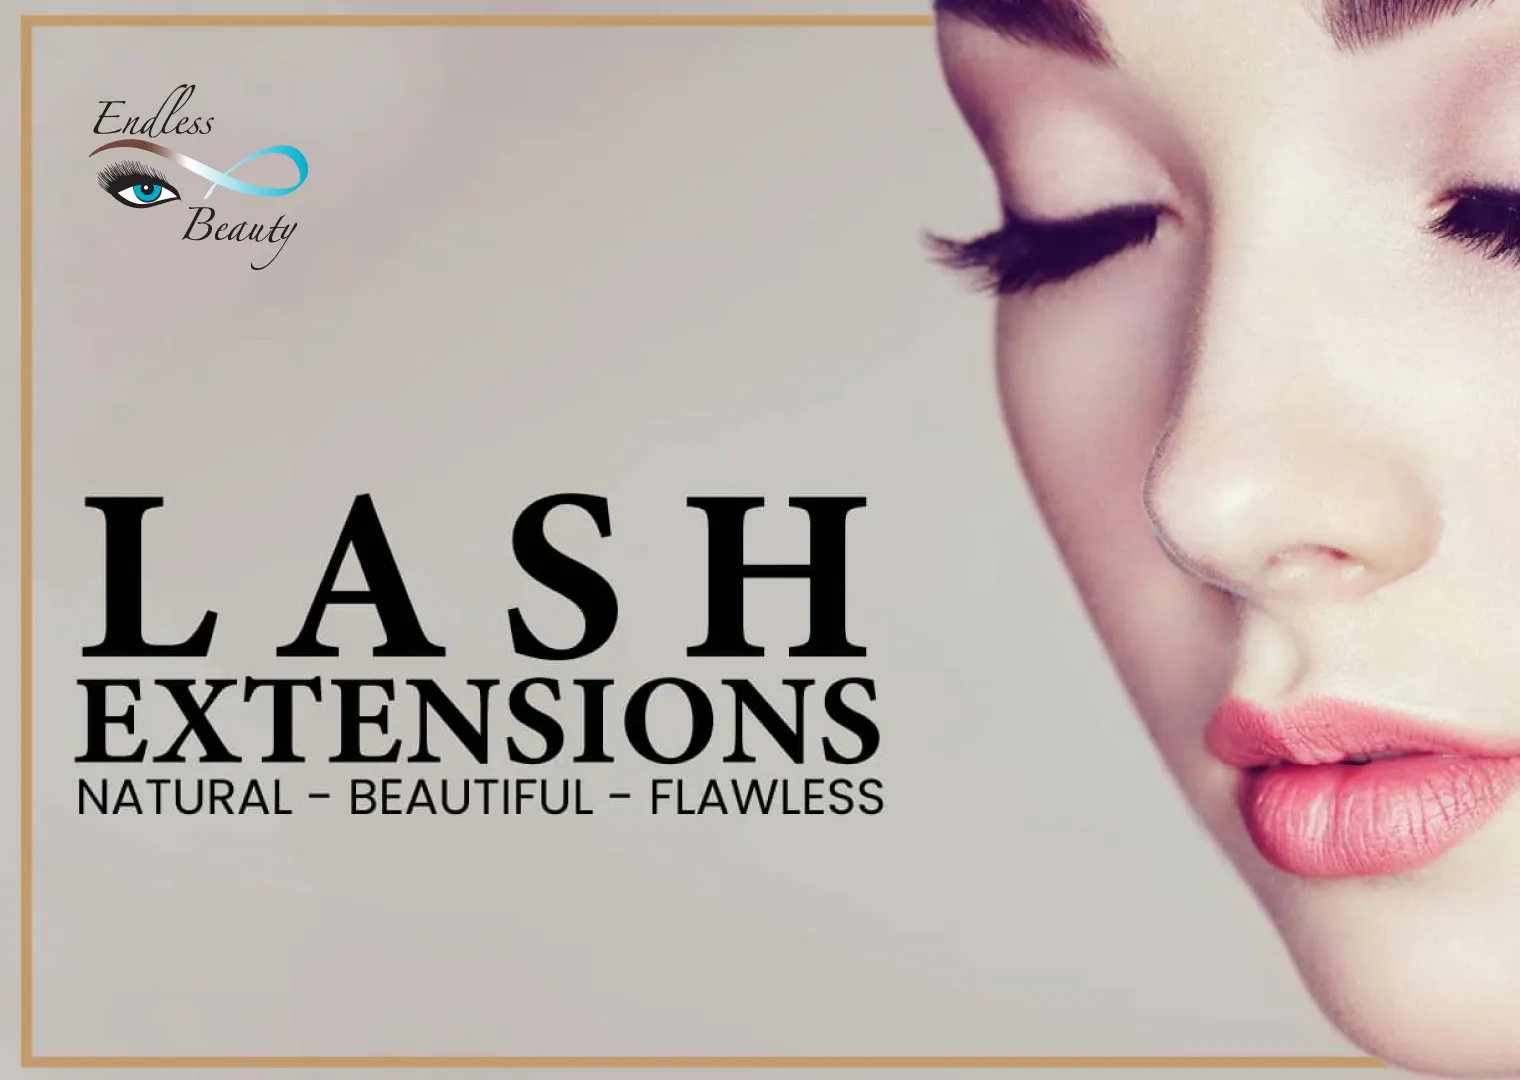 My Endless Beauty - Lash Extensions